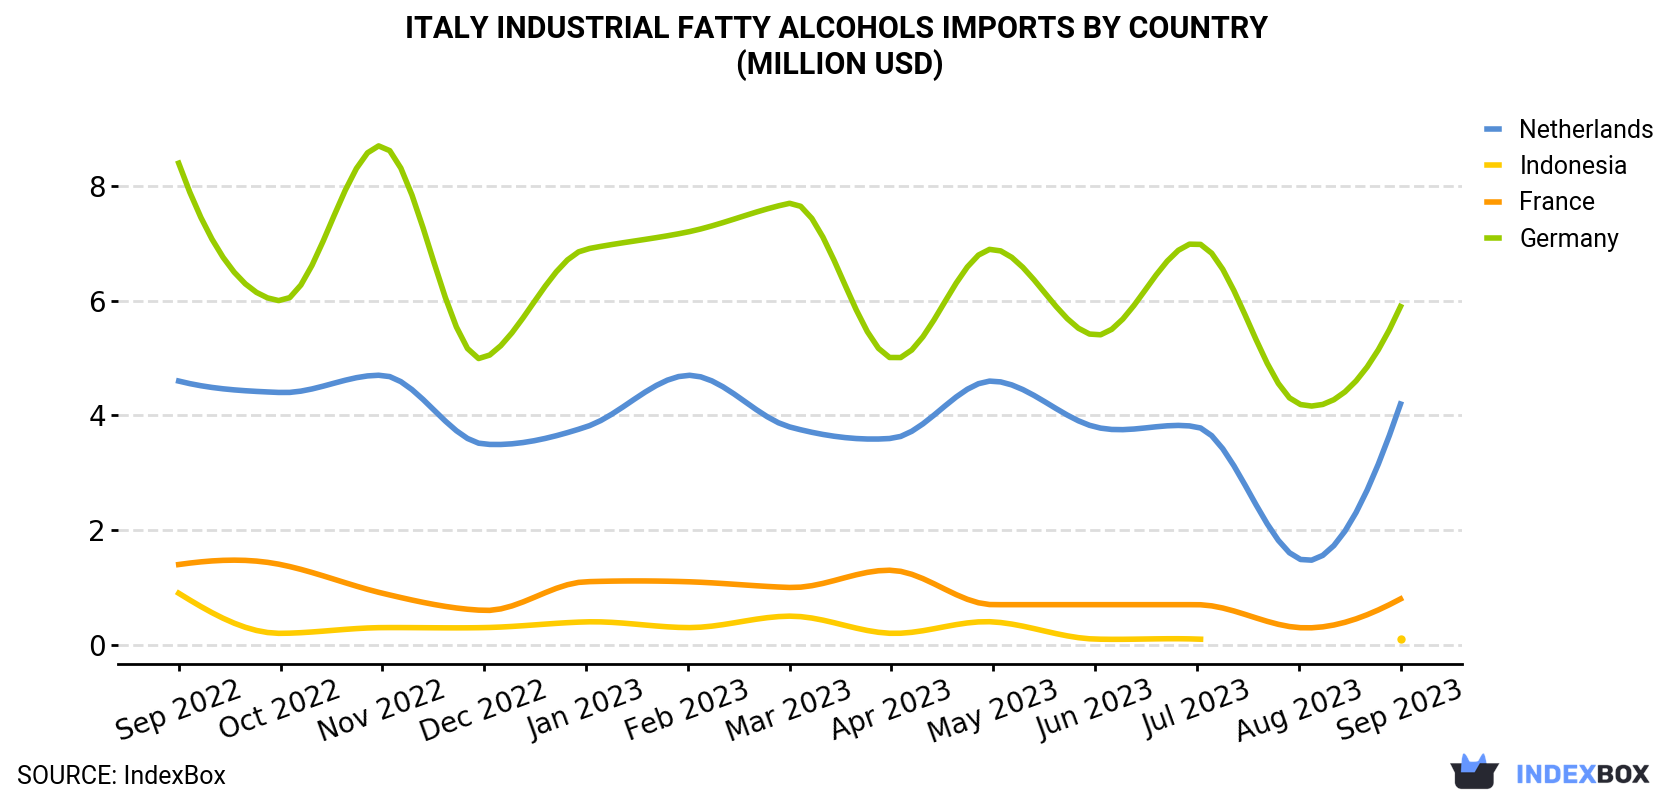 Italy Industrial Fatty Alcohols Imports By Country (Million USD)